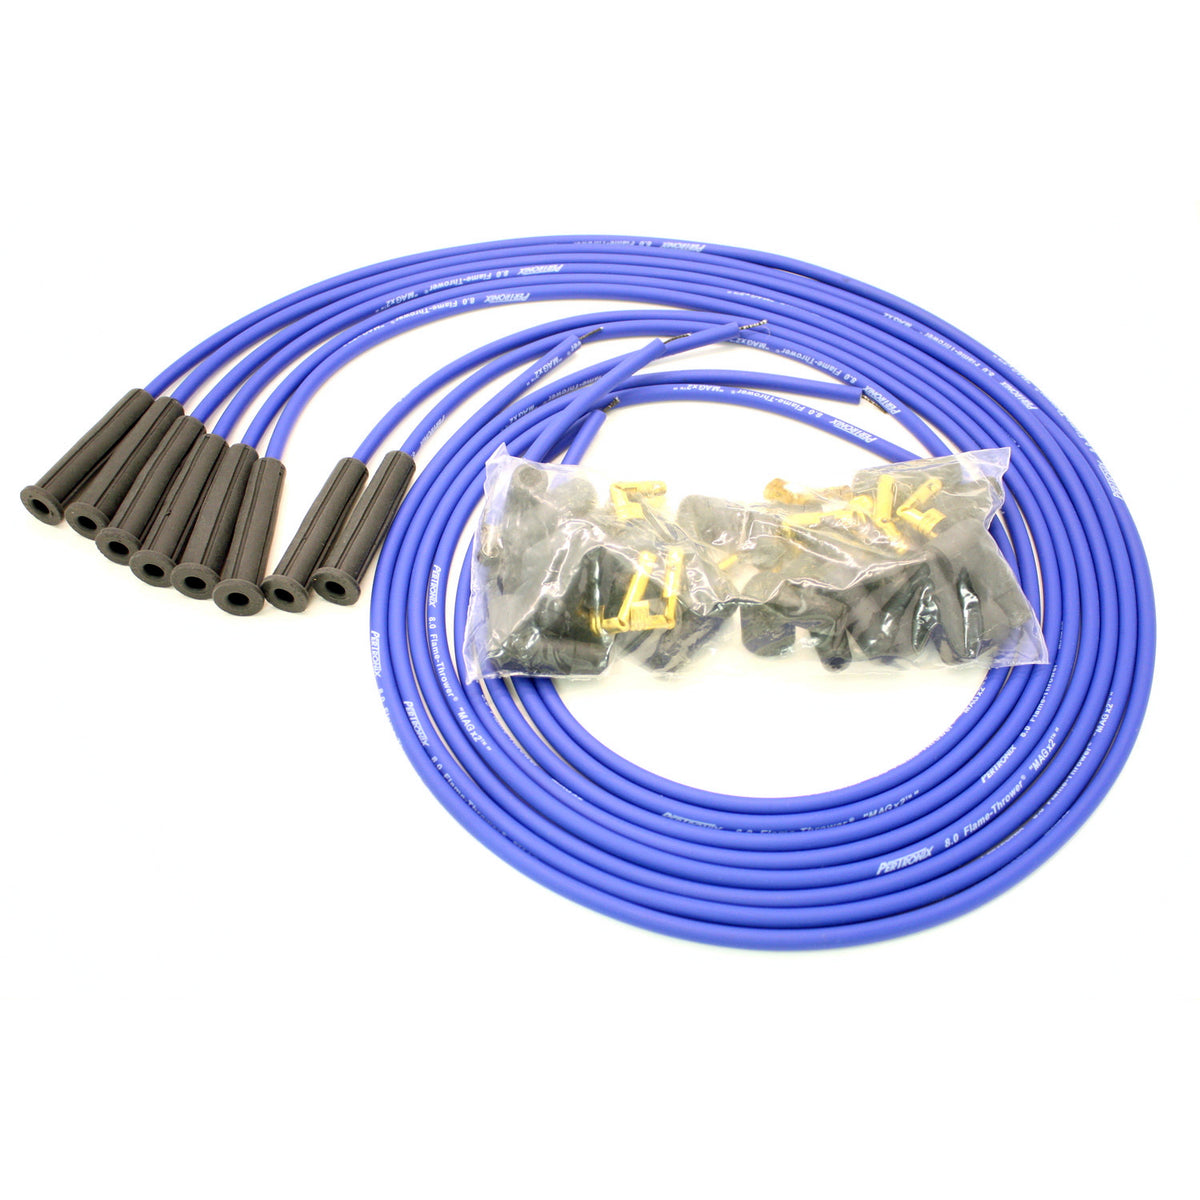 PerTronix 808380 Flame-Thrower Spark Plug Wires 8 cyl 8mm Universal 18 –  Pertronix